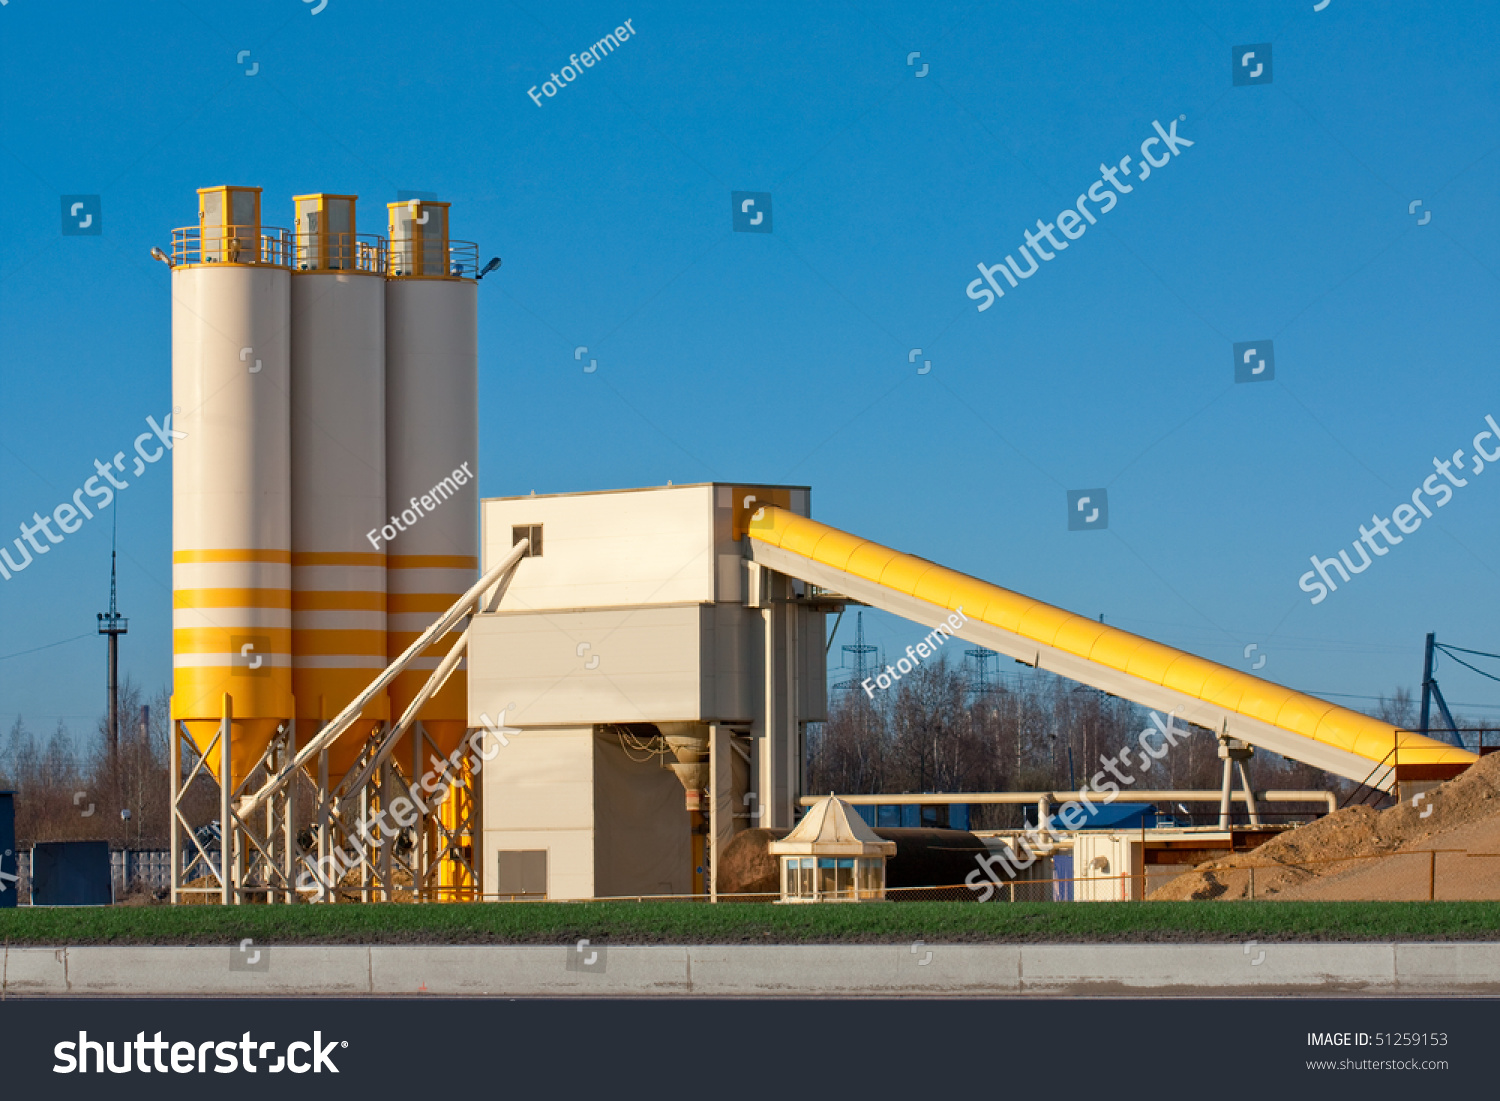 Small Cement Factory With Three Silos And Conveyor Stock Photo 51259153